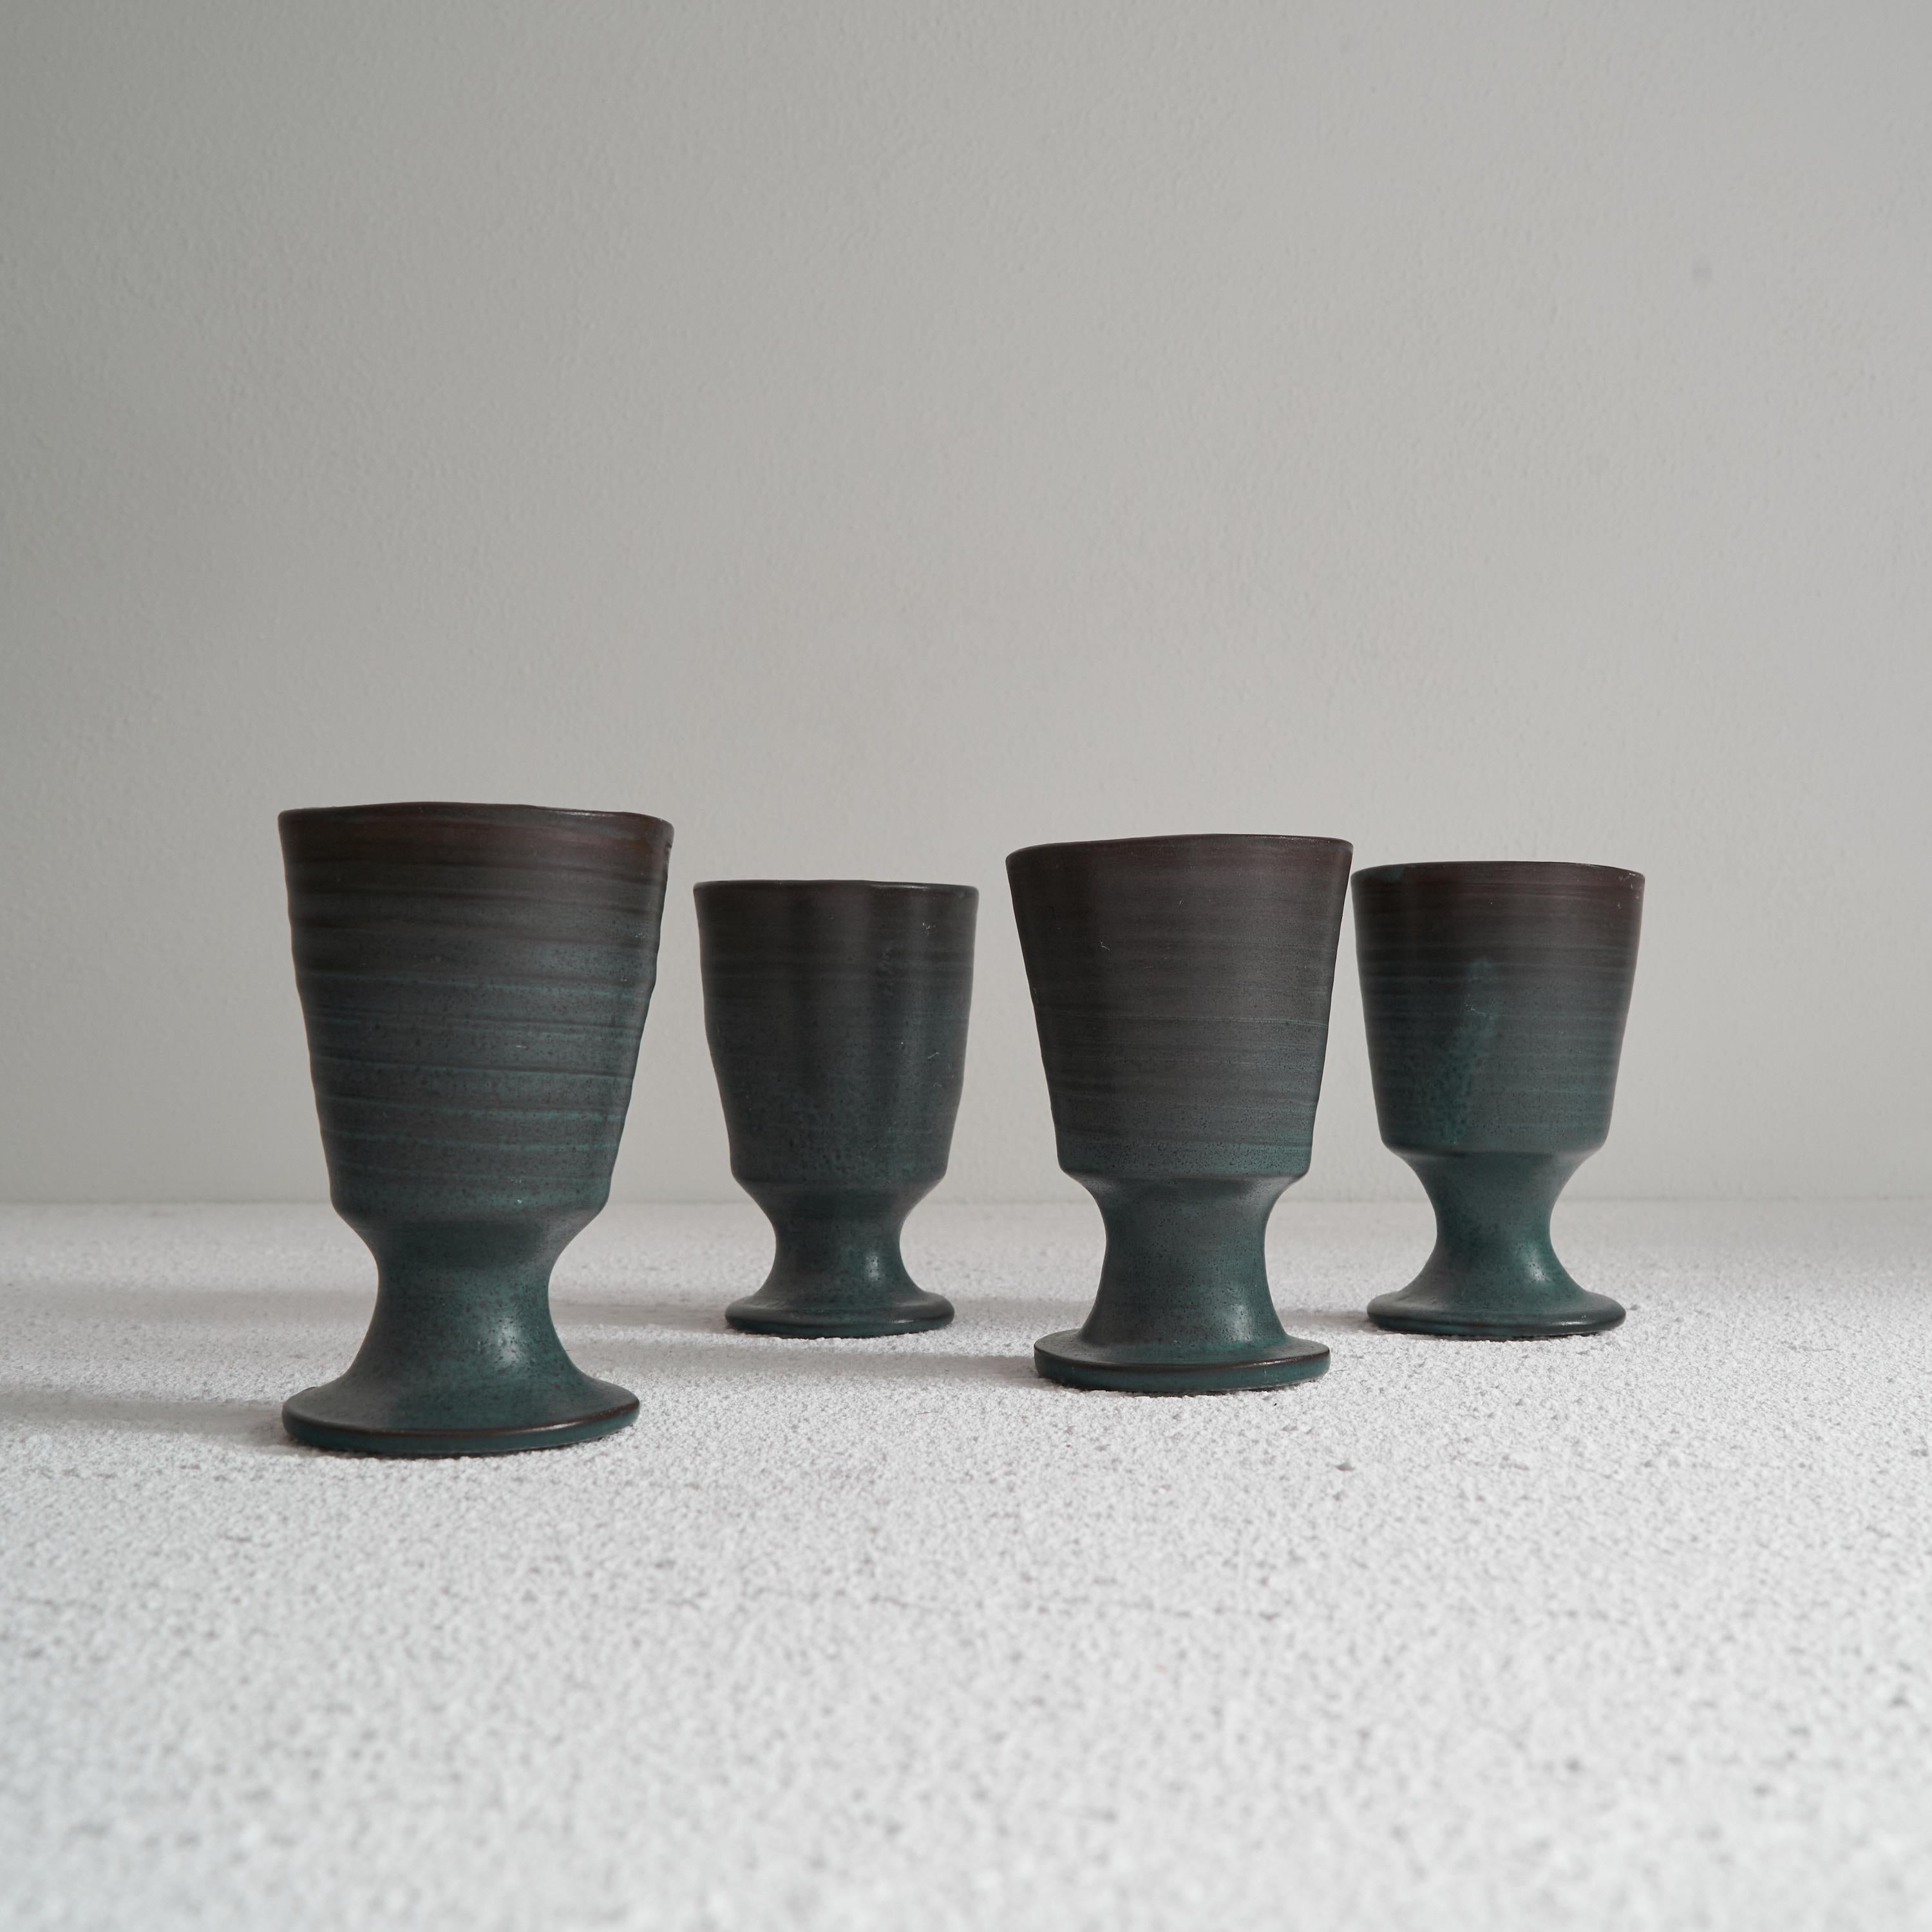 Set of 4 Dutch mid century Studio pottery Goblets. The Netherlands, mid 20th century. 

Wonderful set of 4 studio pottery goblets made in the Netherlands, somewhere in the middle of the previous century. Great shape and color, shifting from green